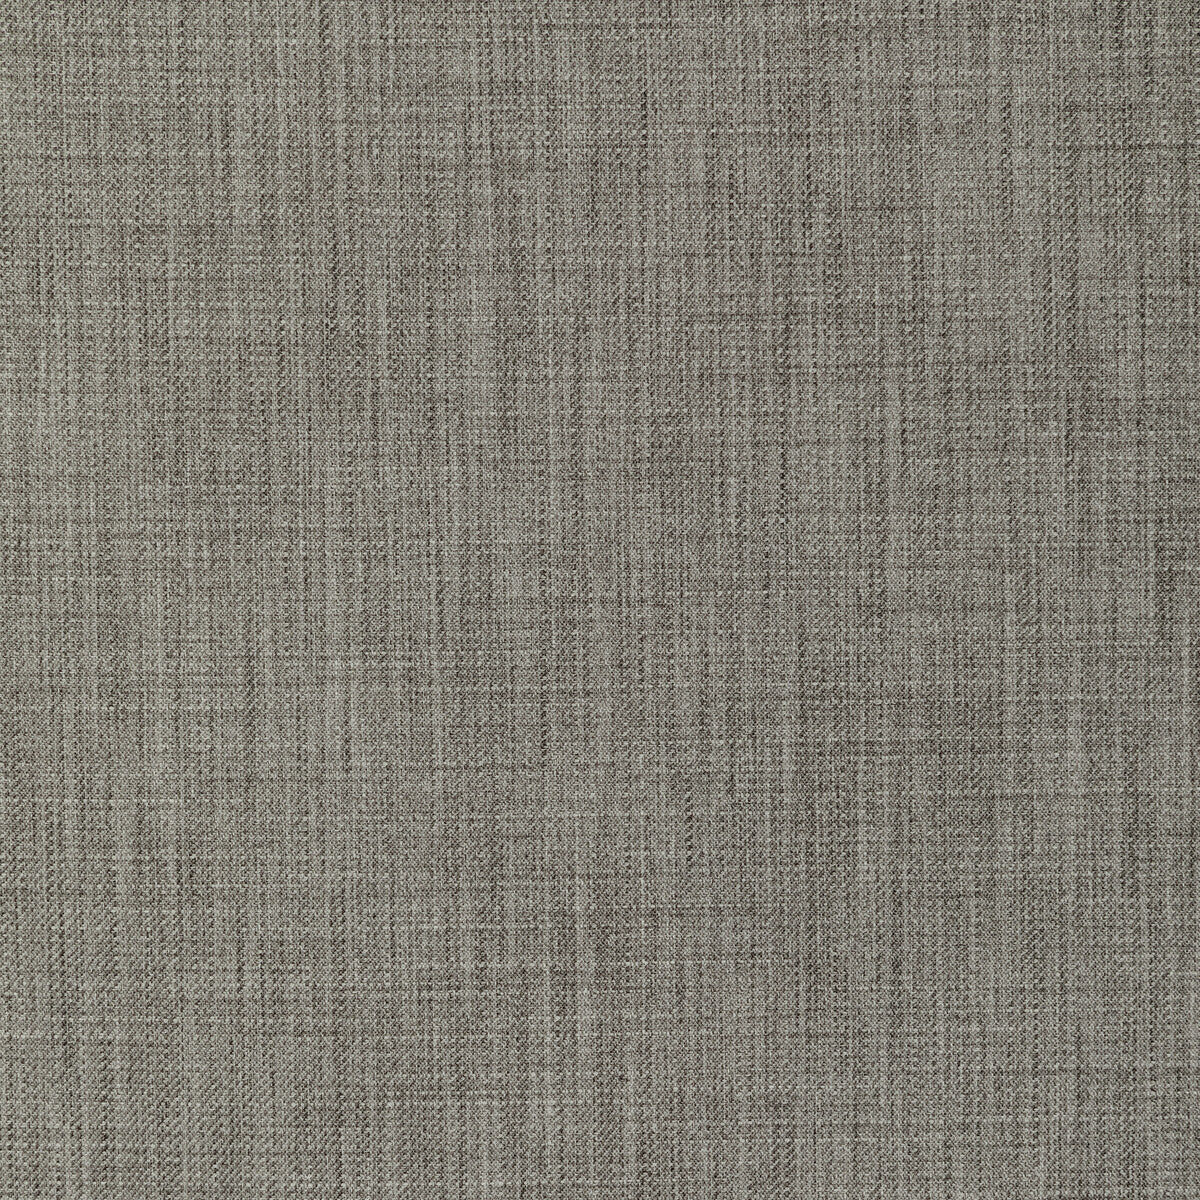 Kravet Smart fabric in 36293-1121 color - pattern 36293.1121.0 - by Kravet Smart in the Performance Crypton Home collection